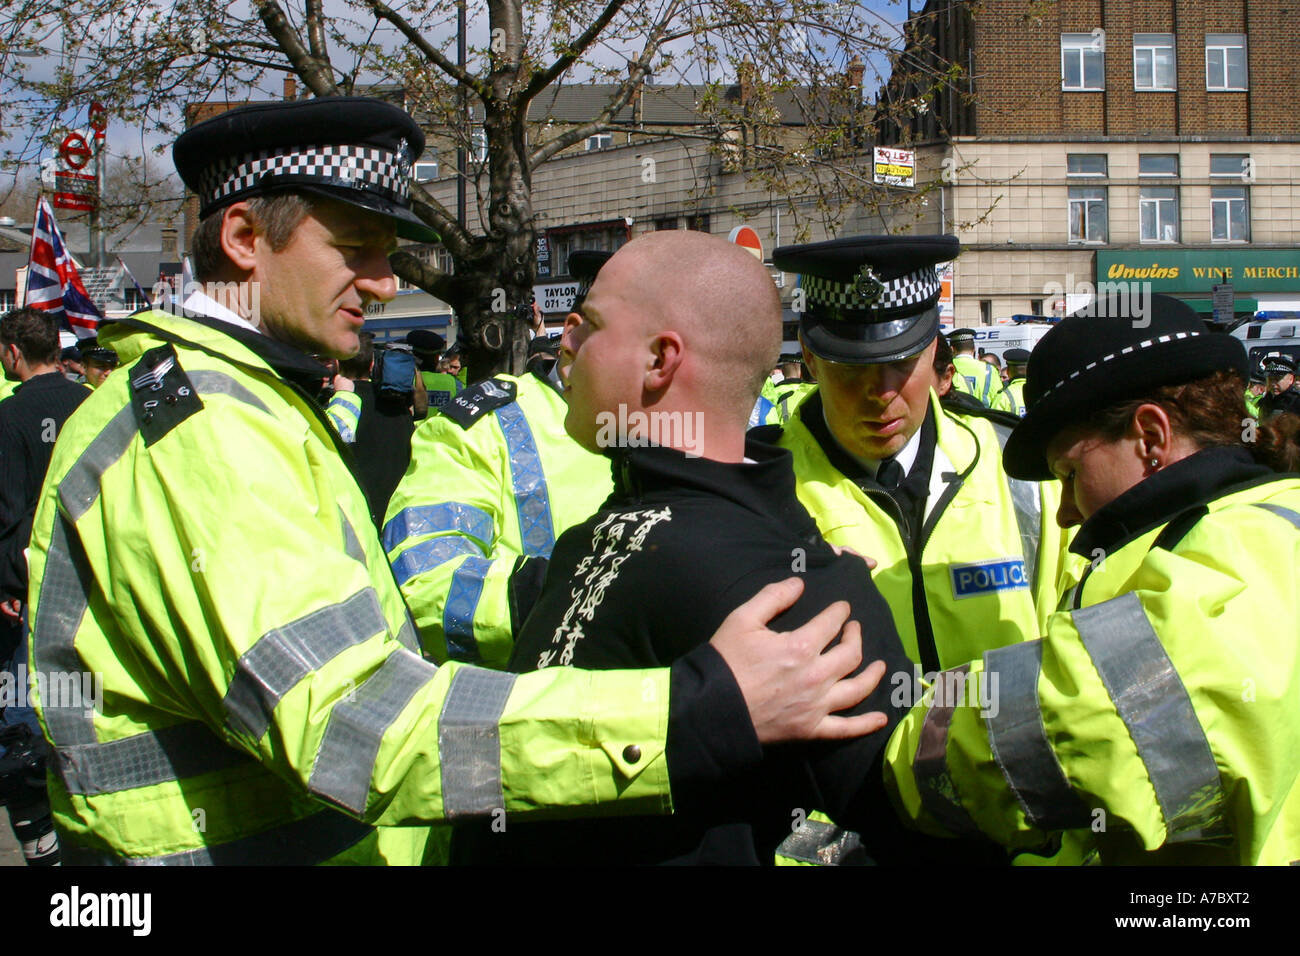 A BNP member being arrested by Police at a BNP Rally outside Finsbury Park Mosque, London. Stock Photo